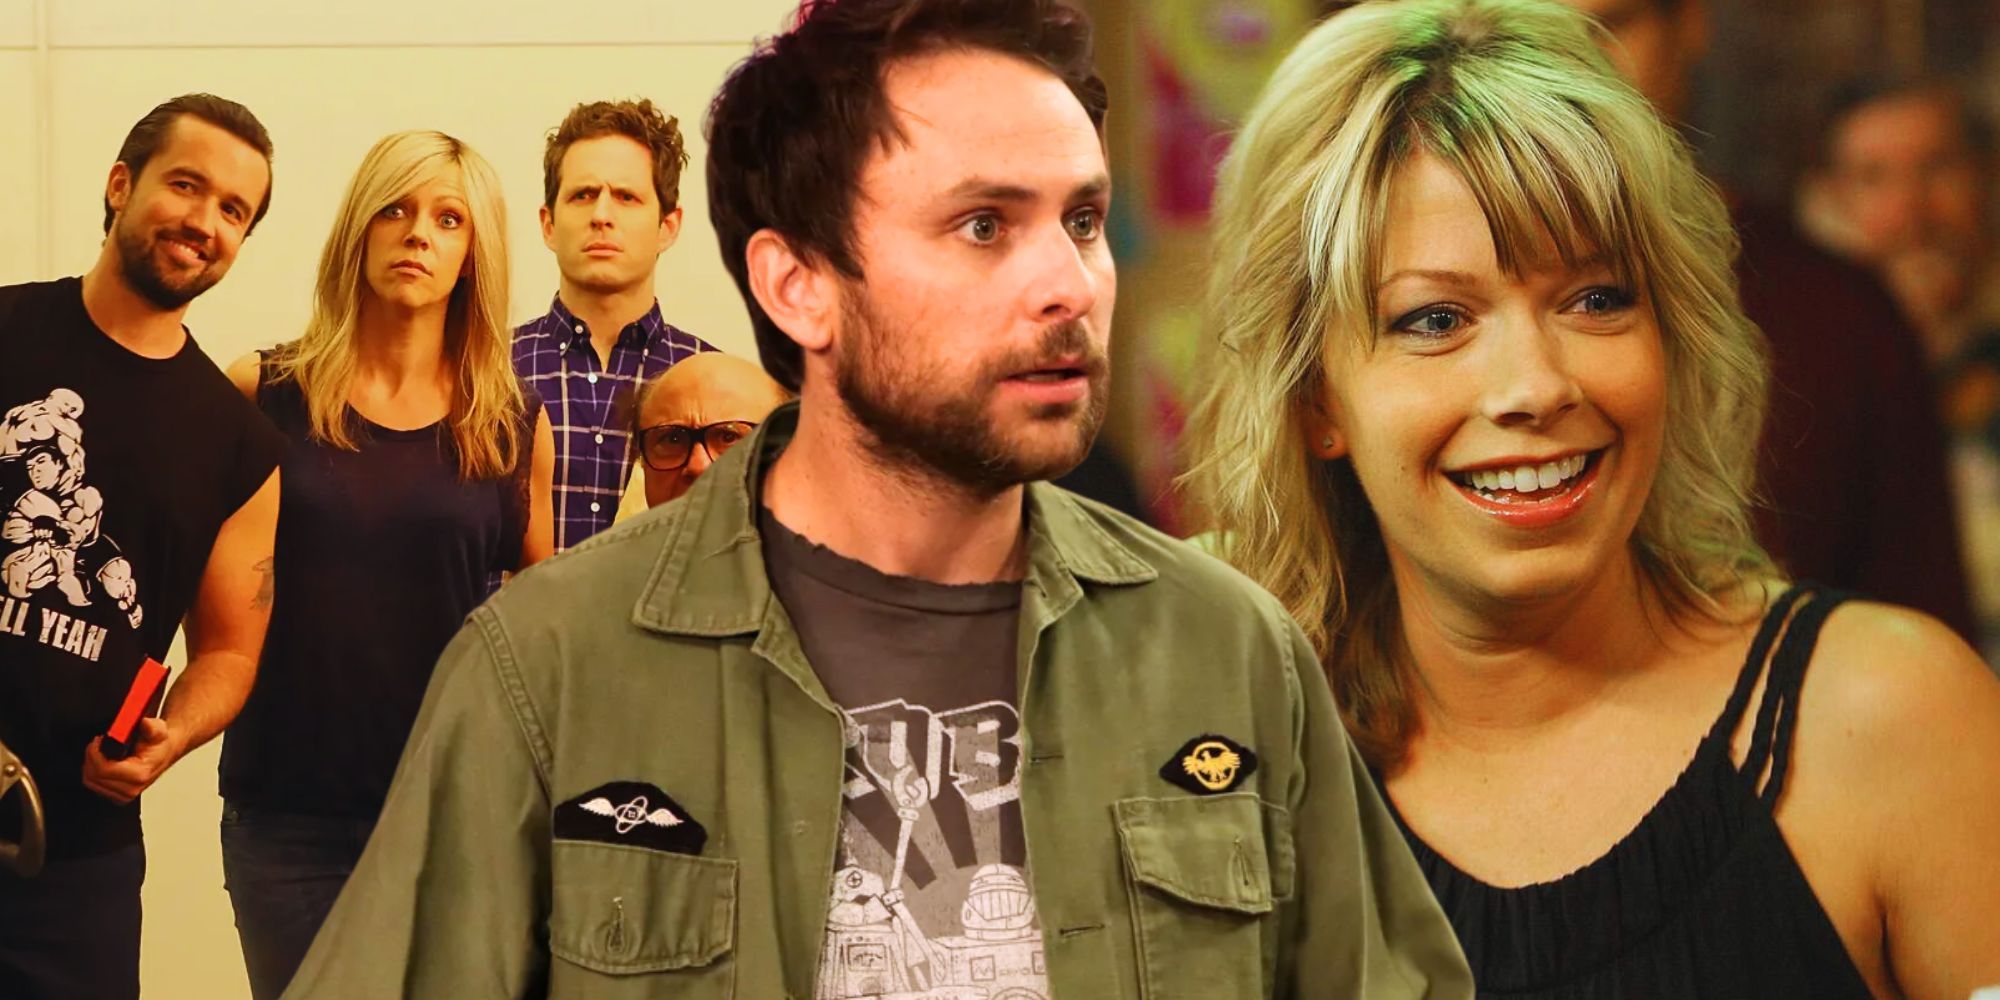 The cast of It's Always Sunny and Mary Elizabeth Ellis